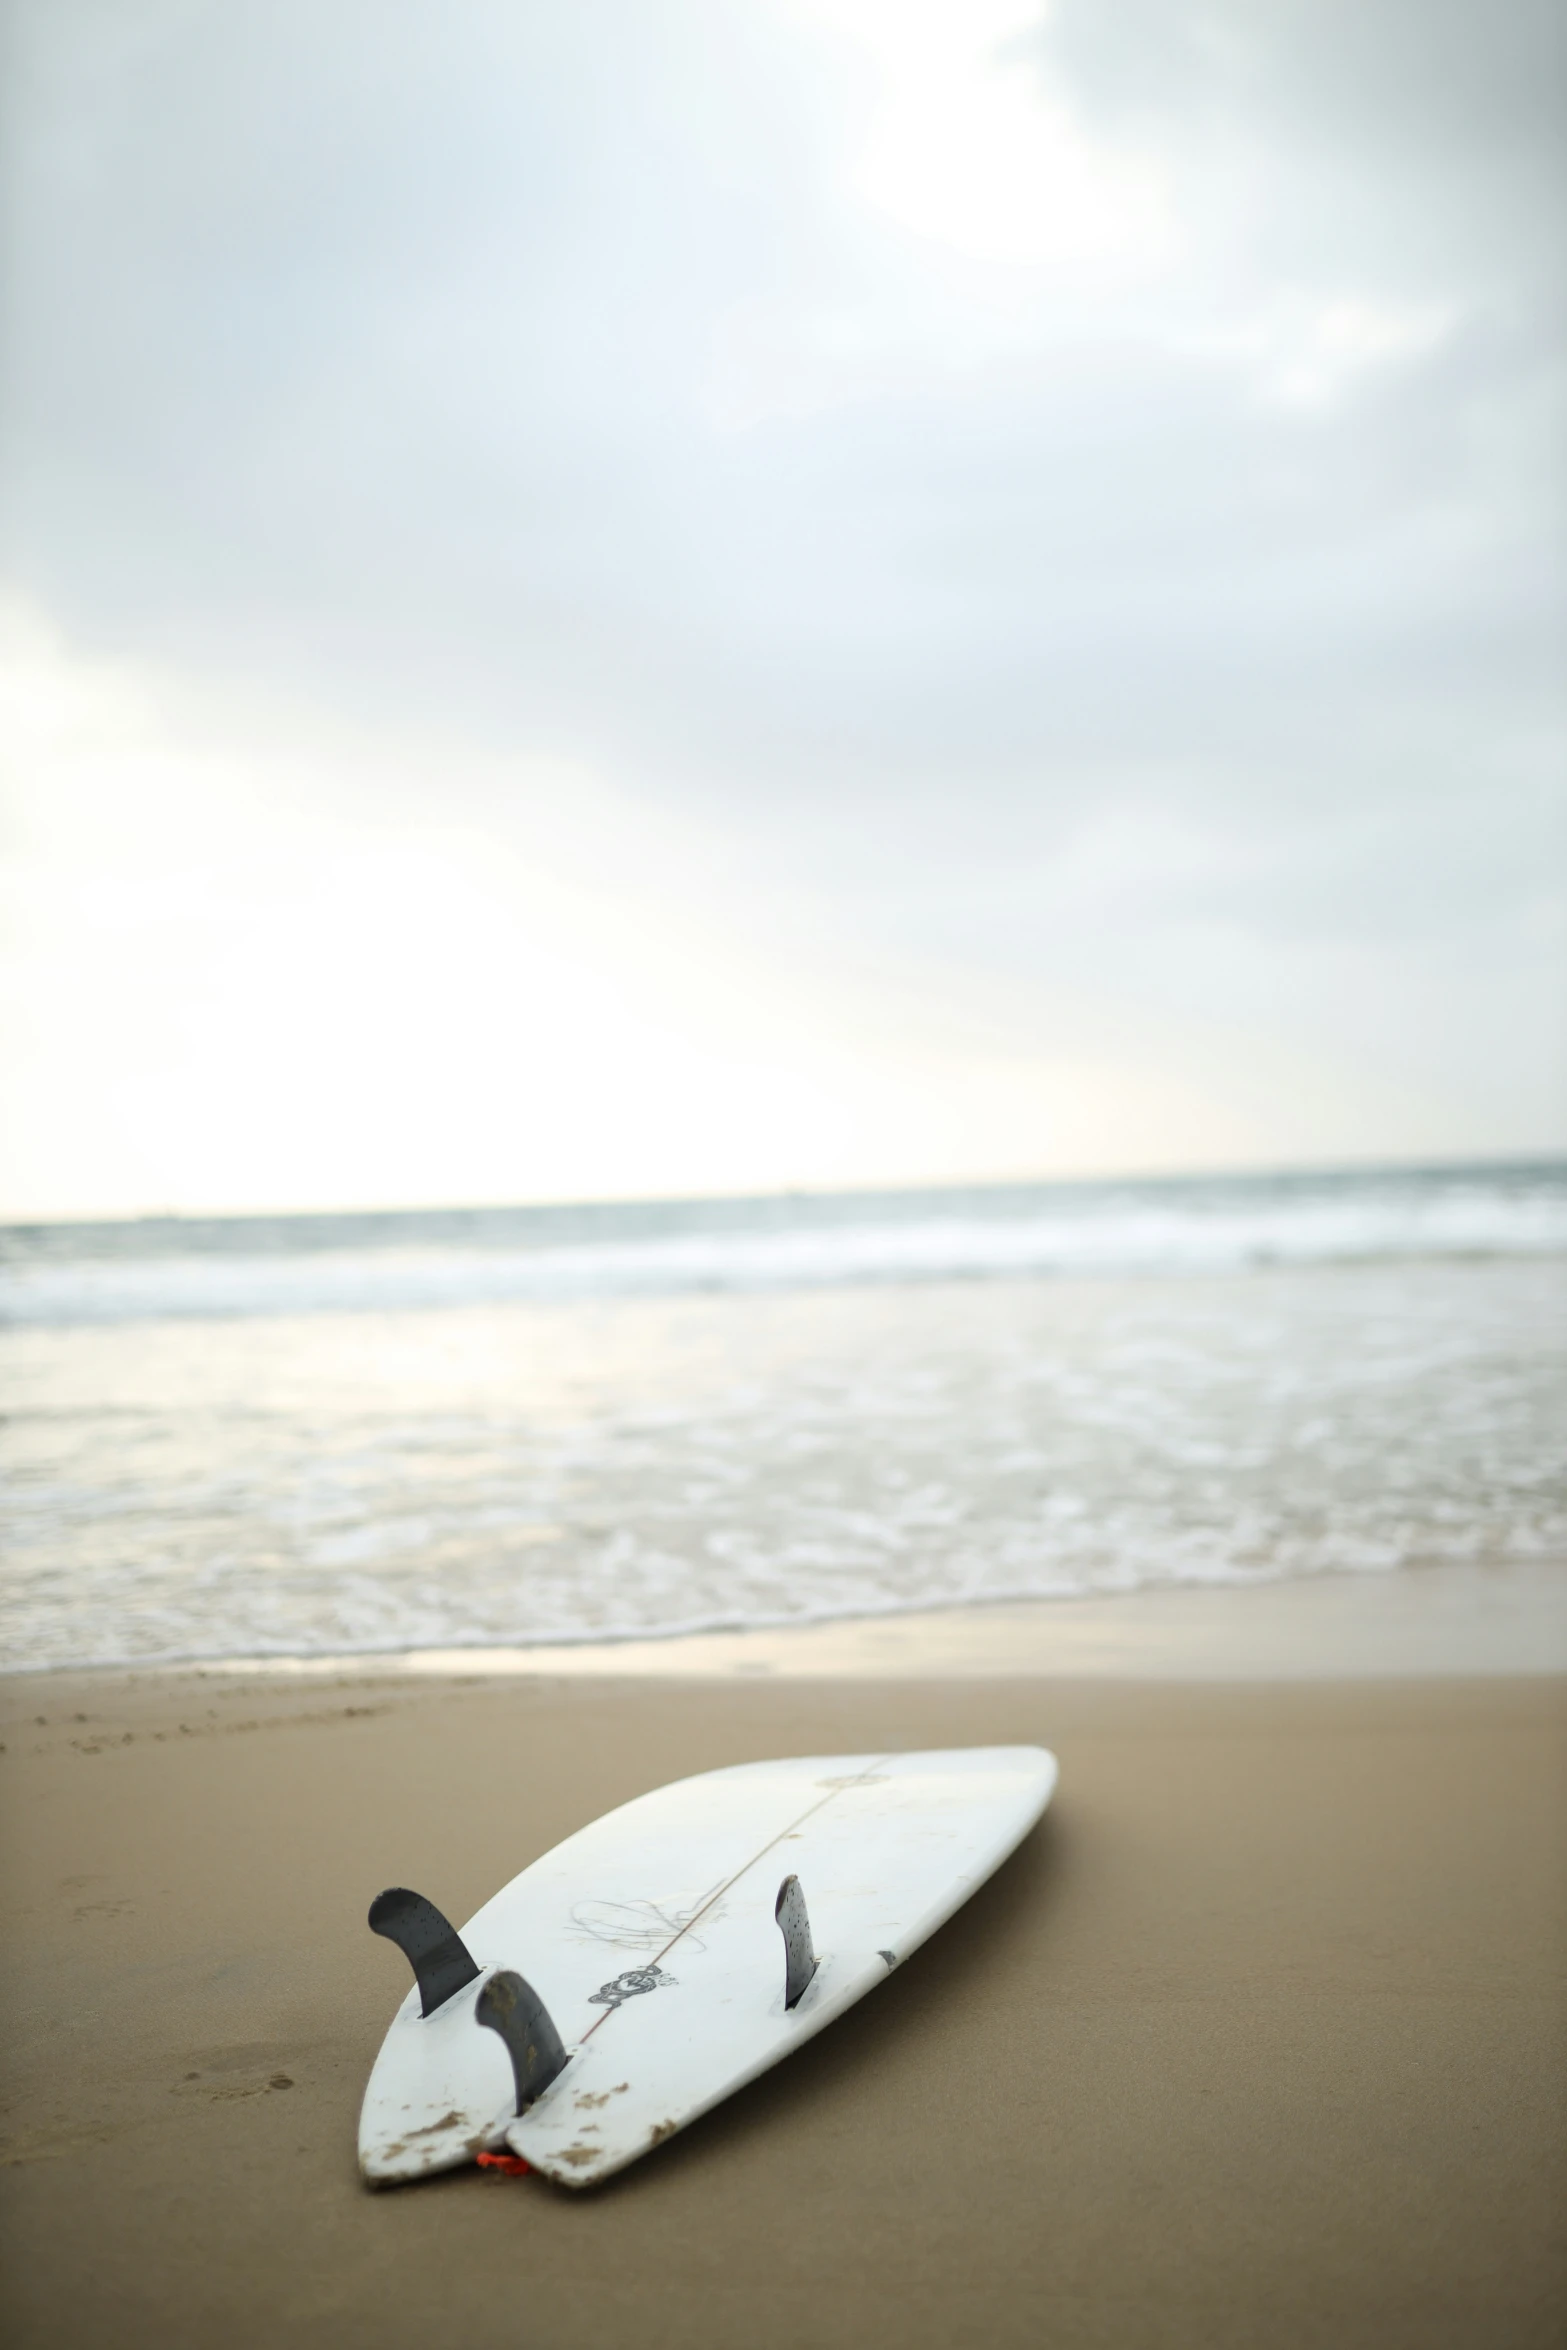 there is a surfboard lying on the beach shore